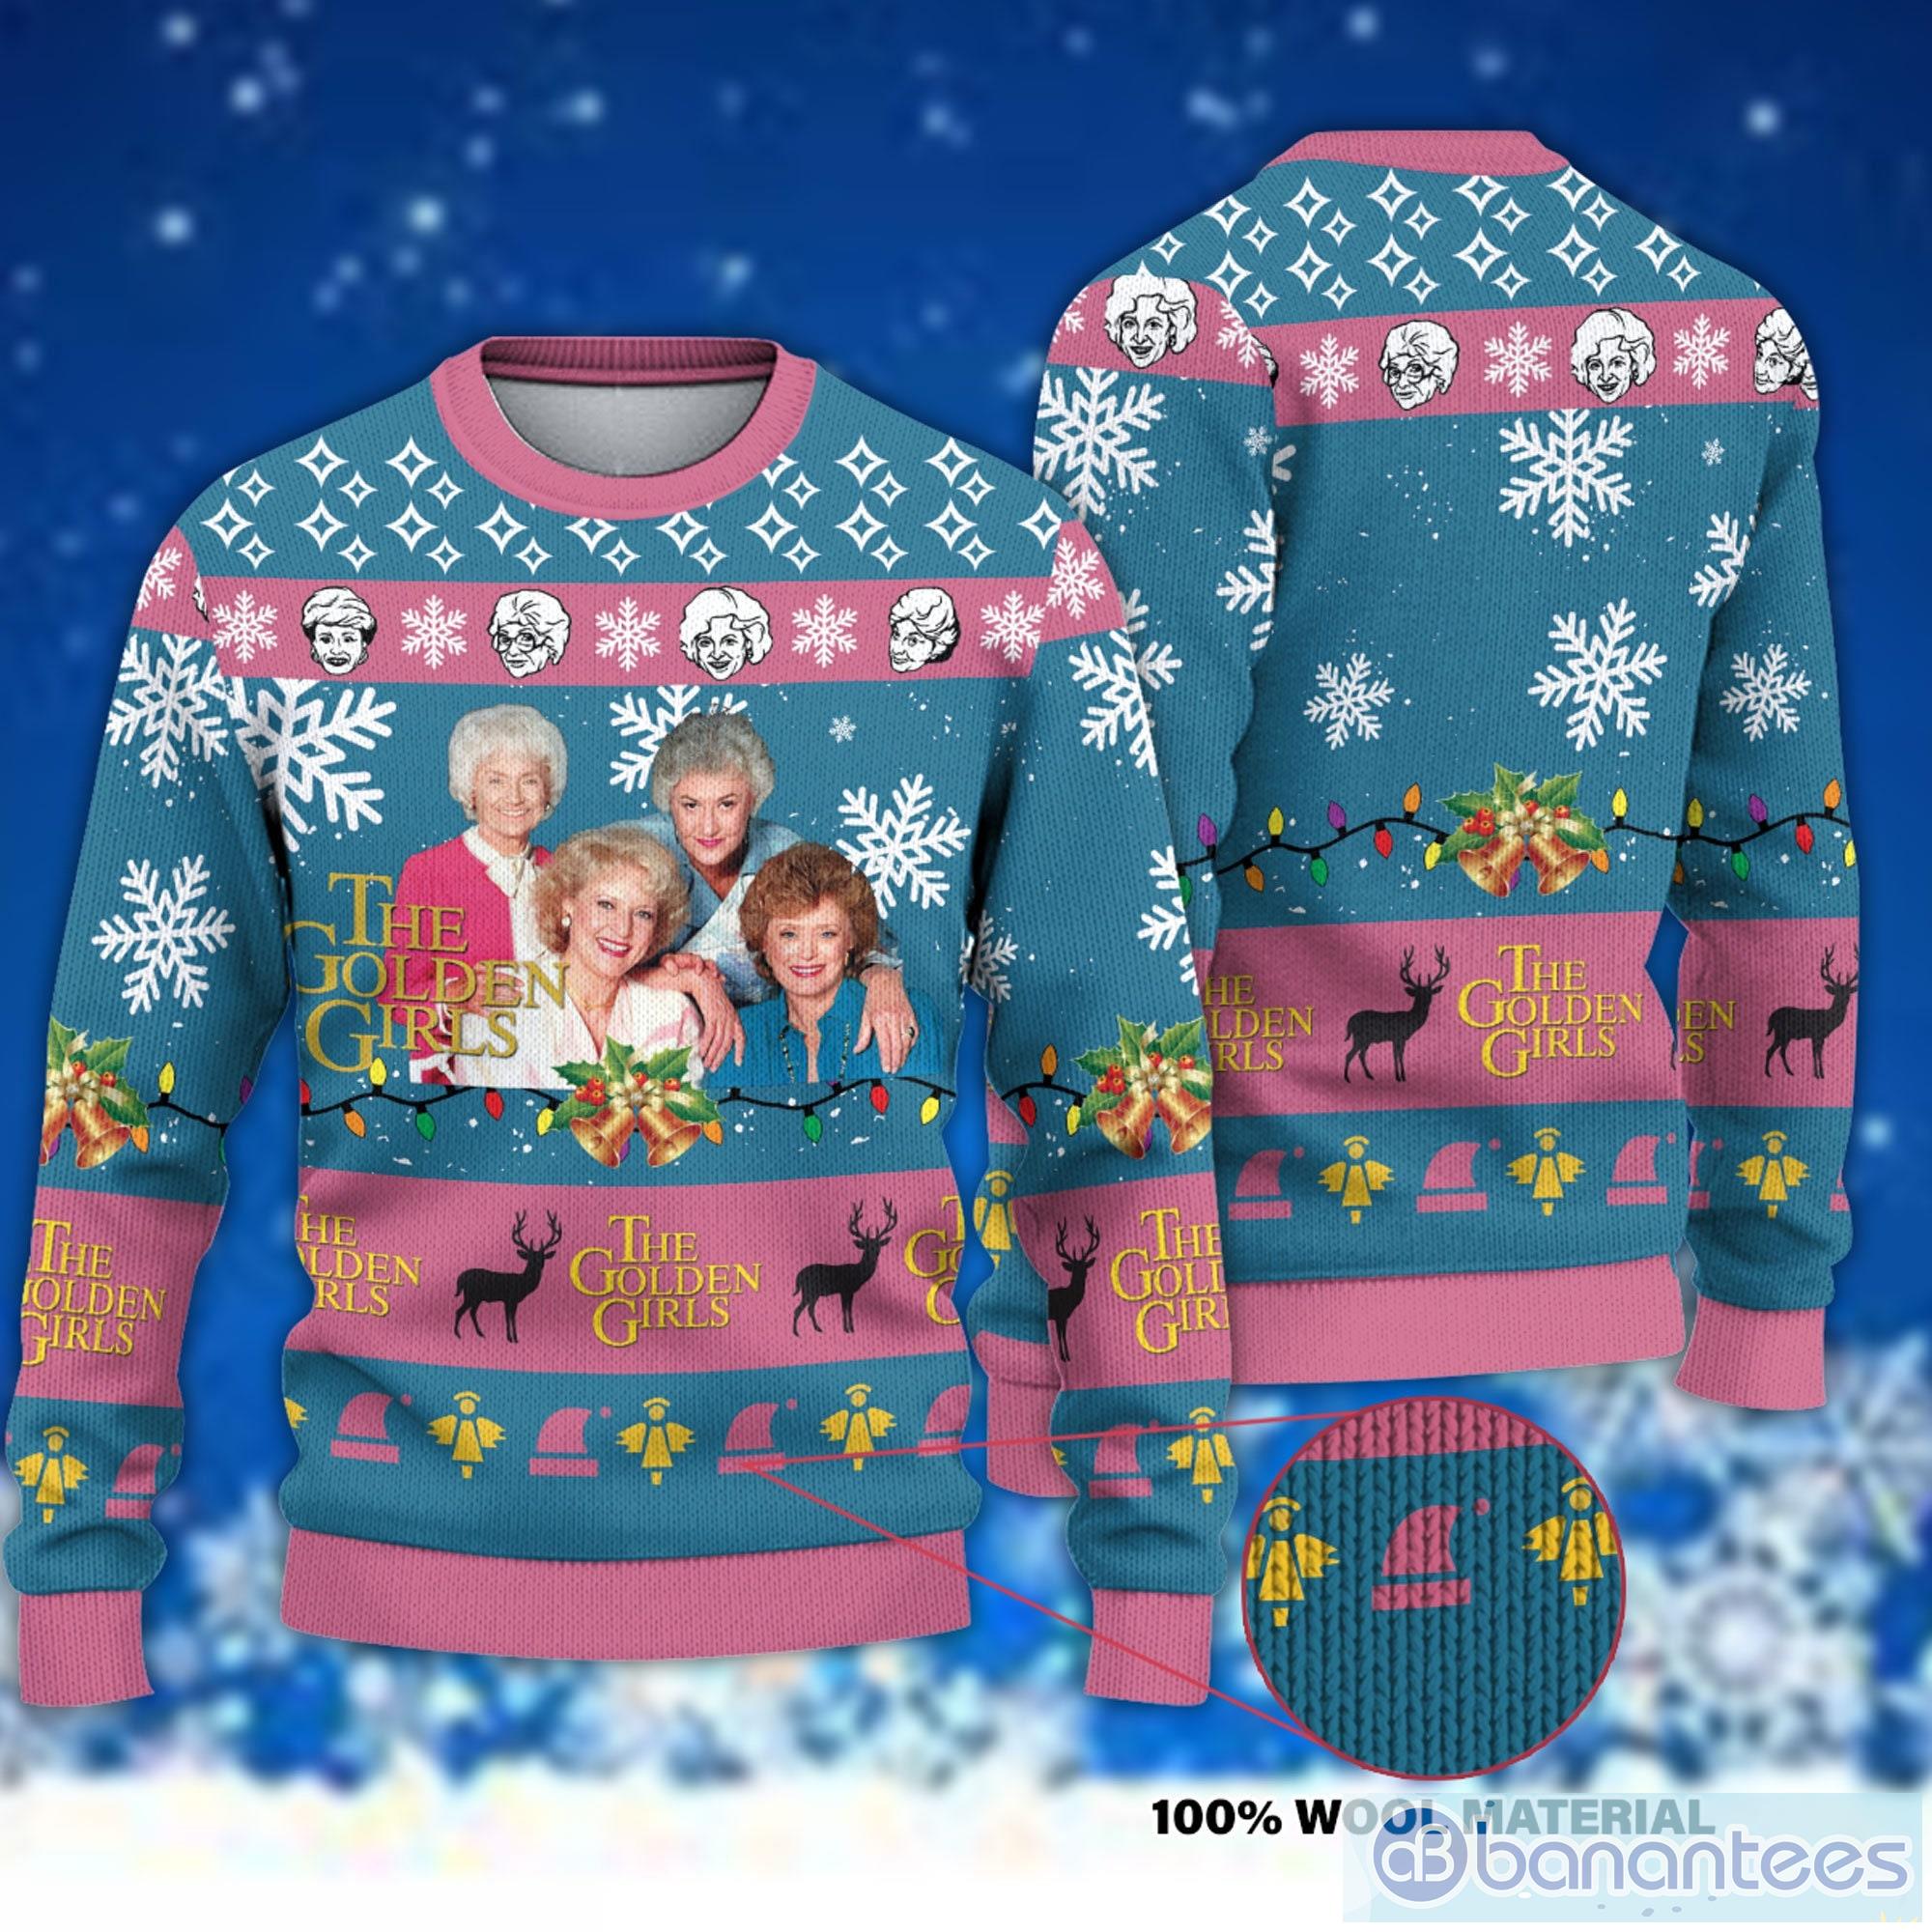 The Golden Girl Thank You For Being A Friend Christmas Sweater Product Photo 1